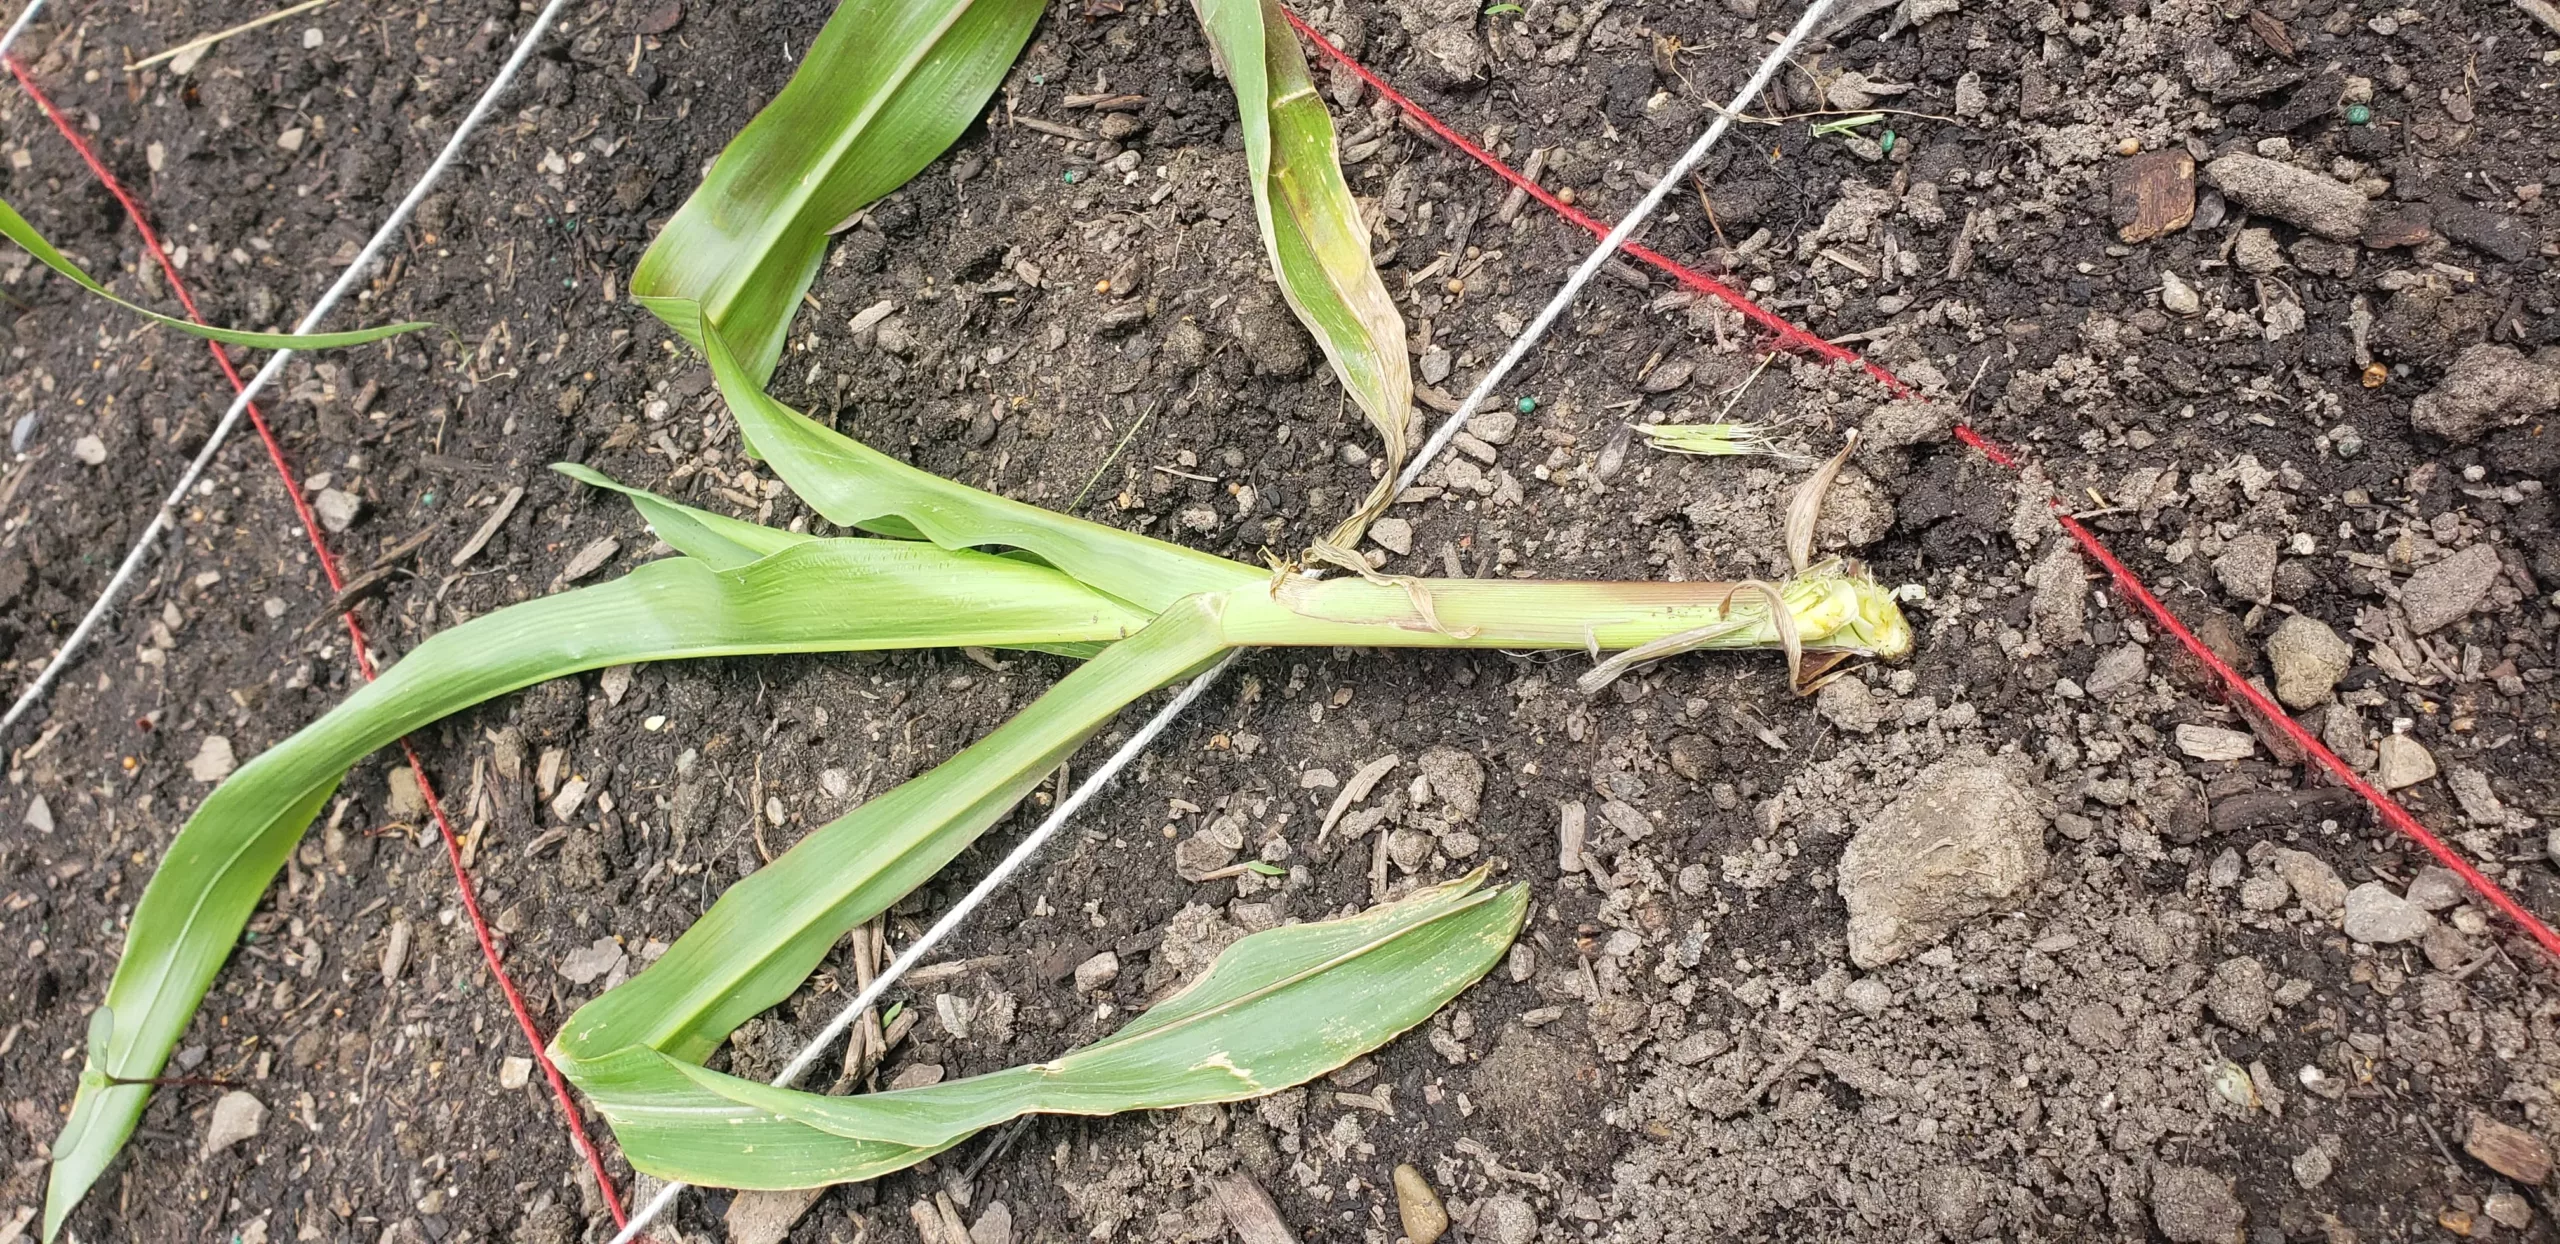 A corn plant laying on the soil surface from cut worm damage